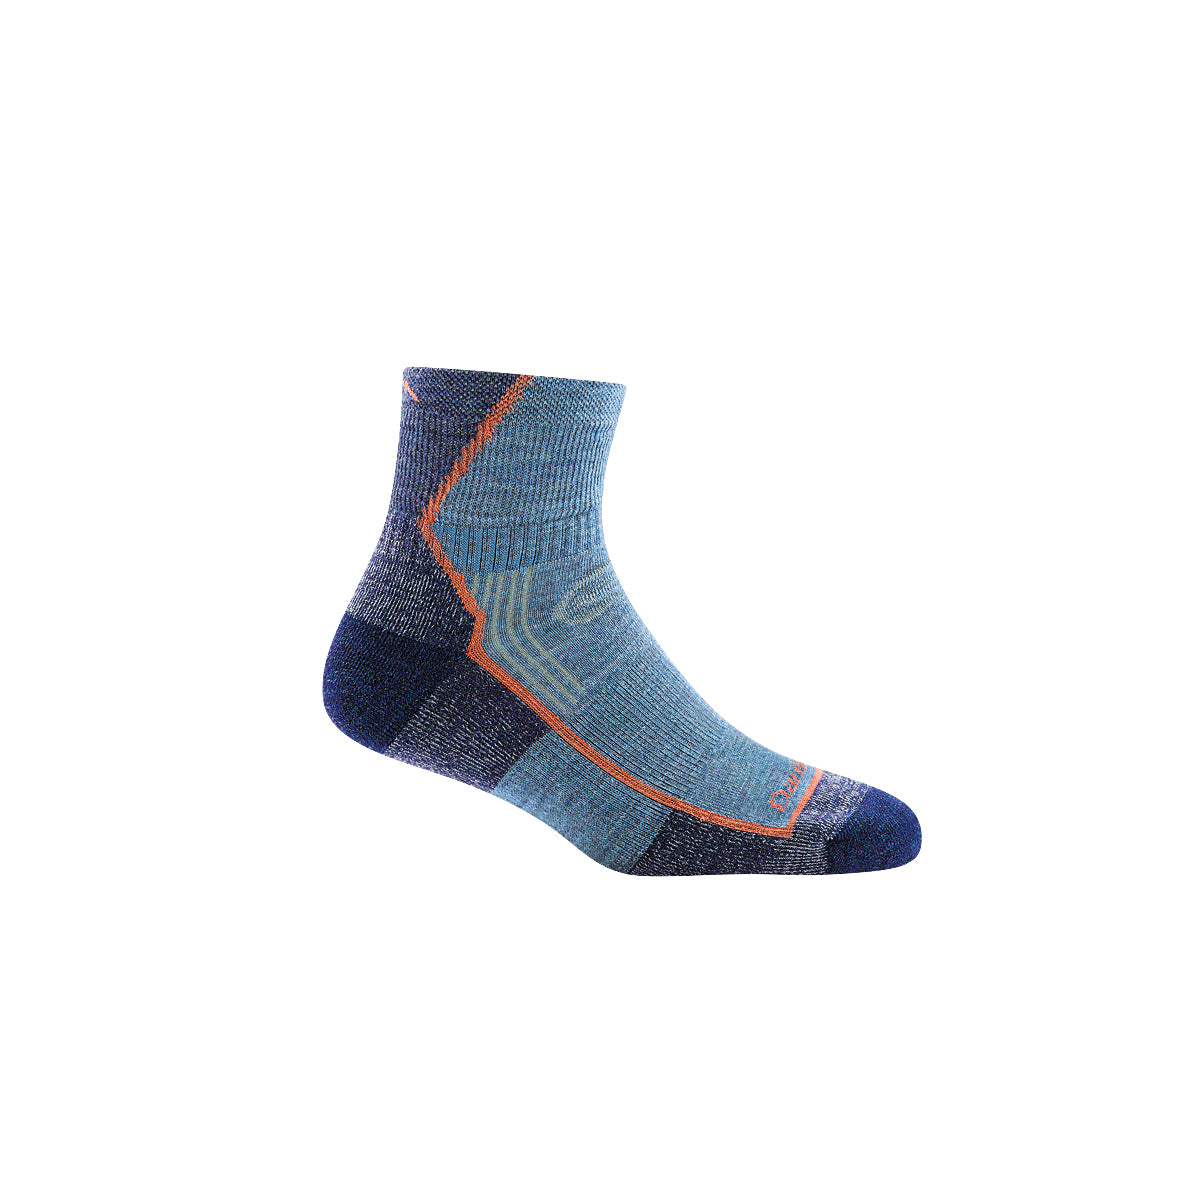 sideview of 1/4 length womens sock in light and dark blue with orange stripe